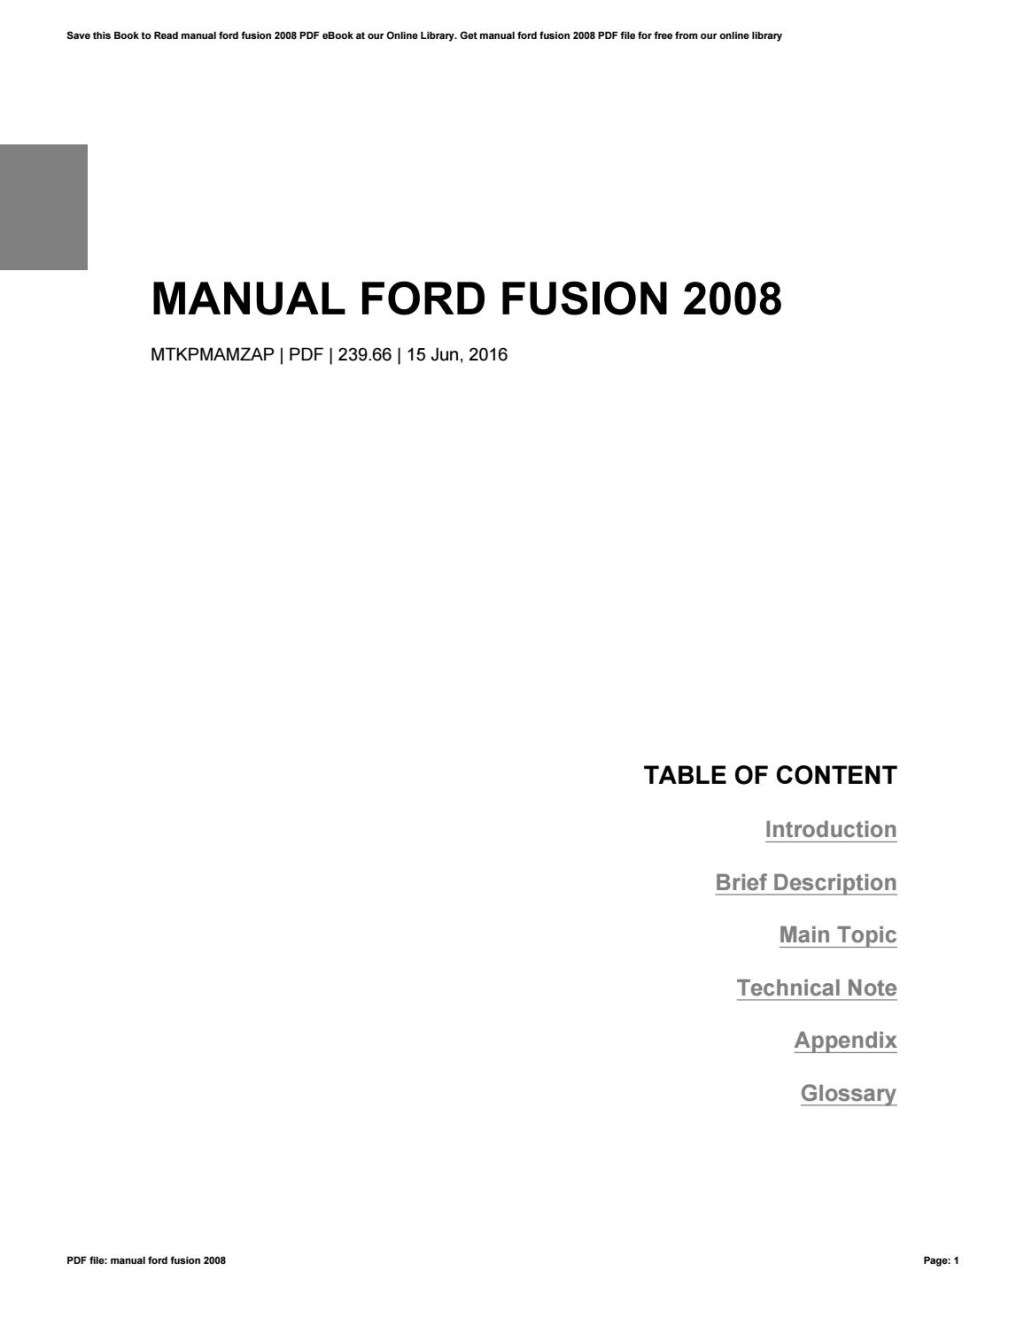 Picture of: Manual ford fusion  by Gina – Issuu